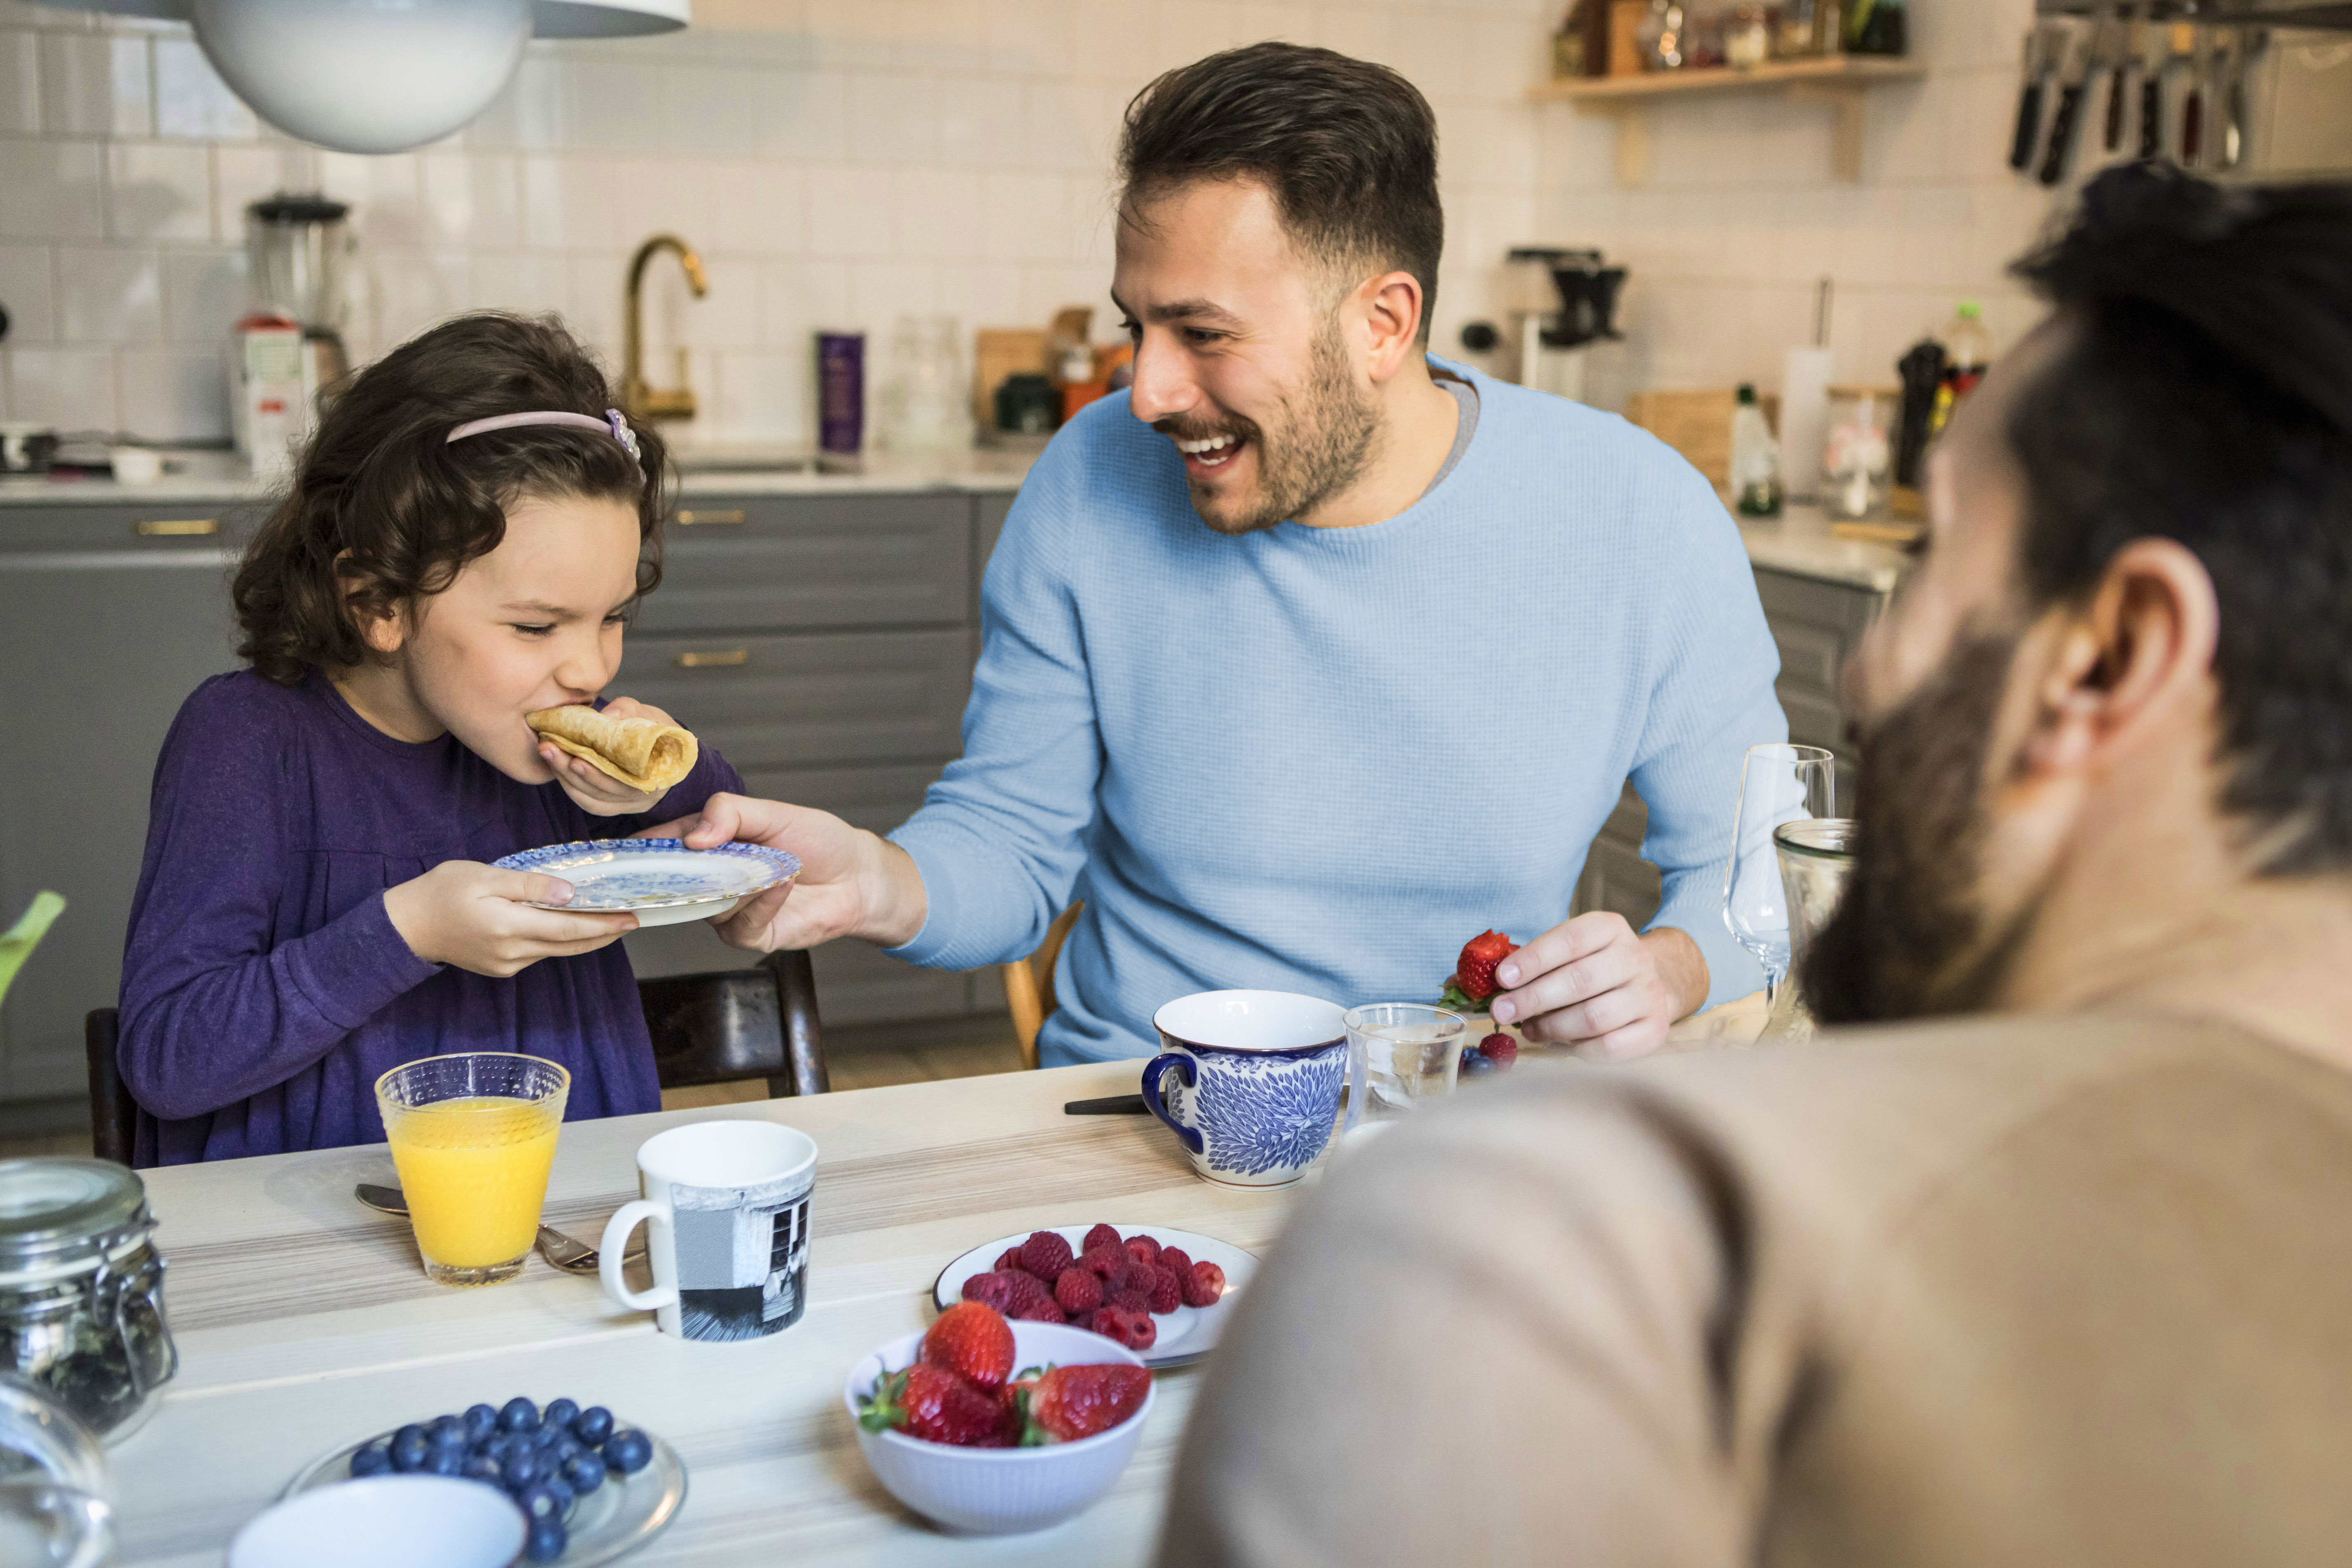 Laughing father holding plate while daughter eats pancake at table. (Maskot/Getty Images)